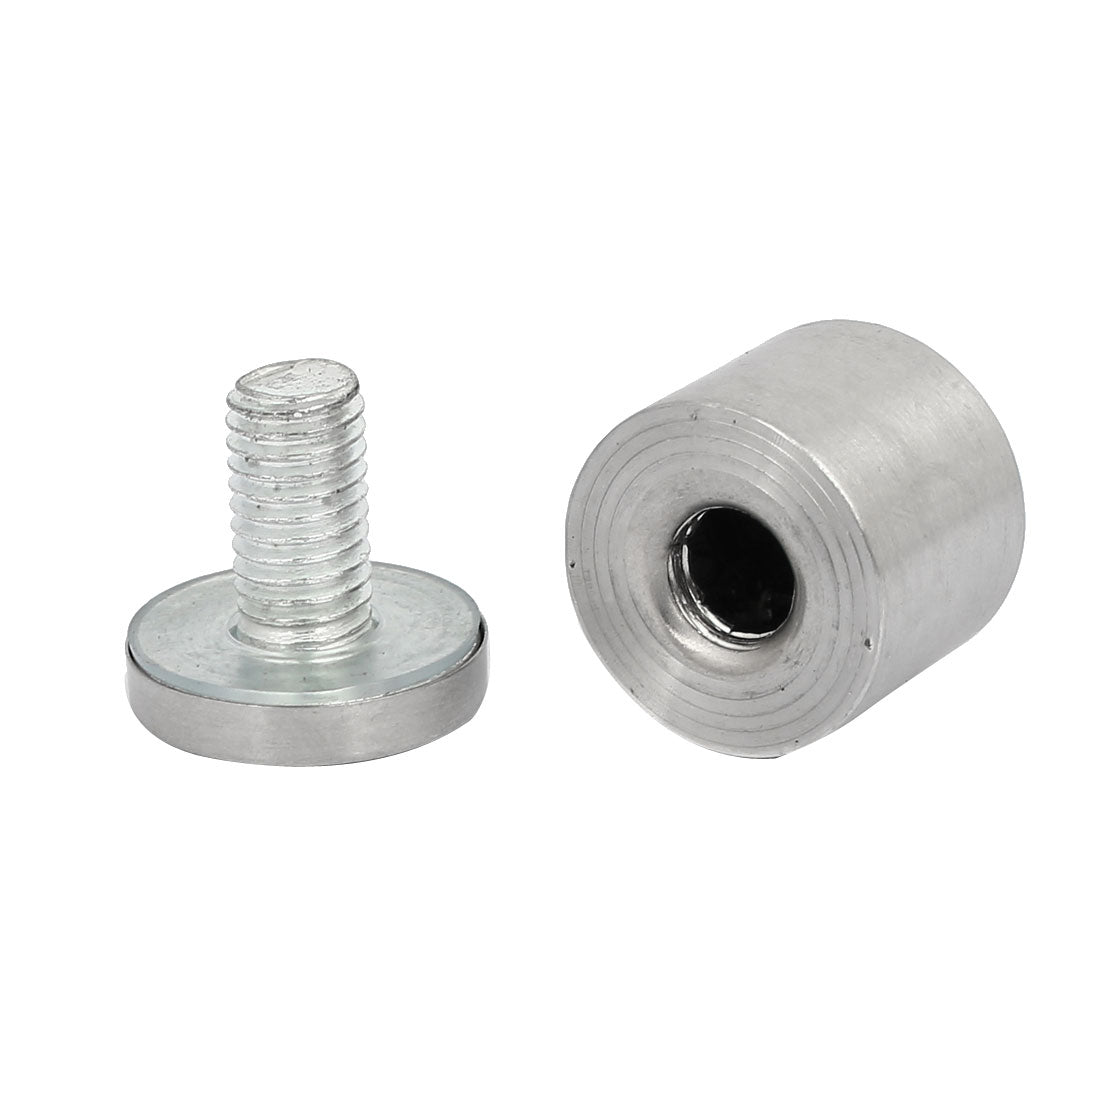 uxcell Uxcell 25mmx25mm Stainless Steel Glass Table Spacers Standoff Fixing Screws Bolts 2pcs